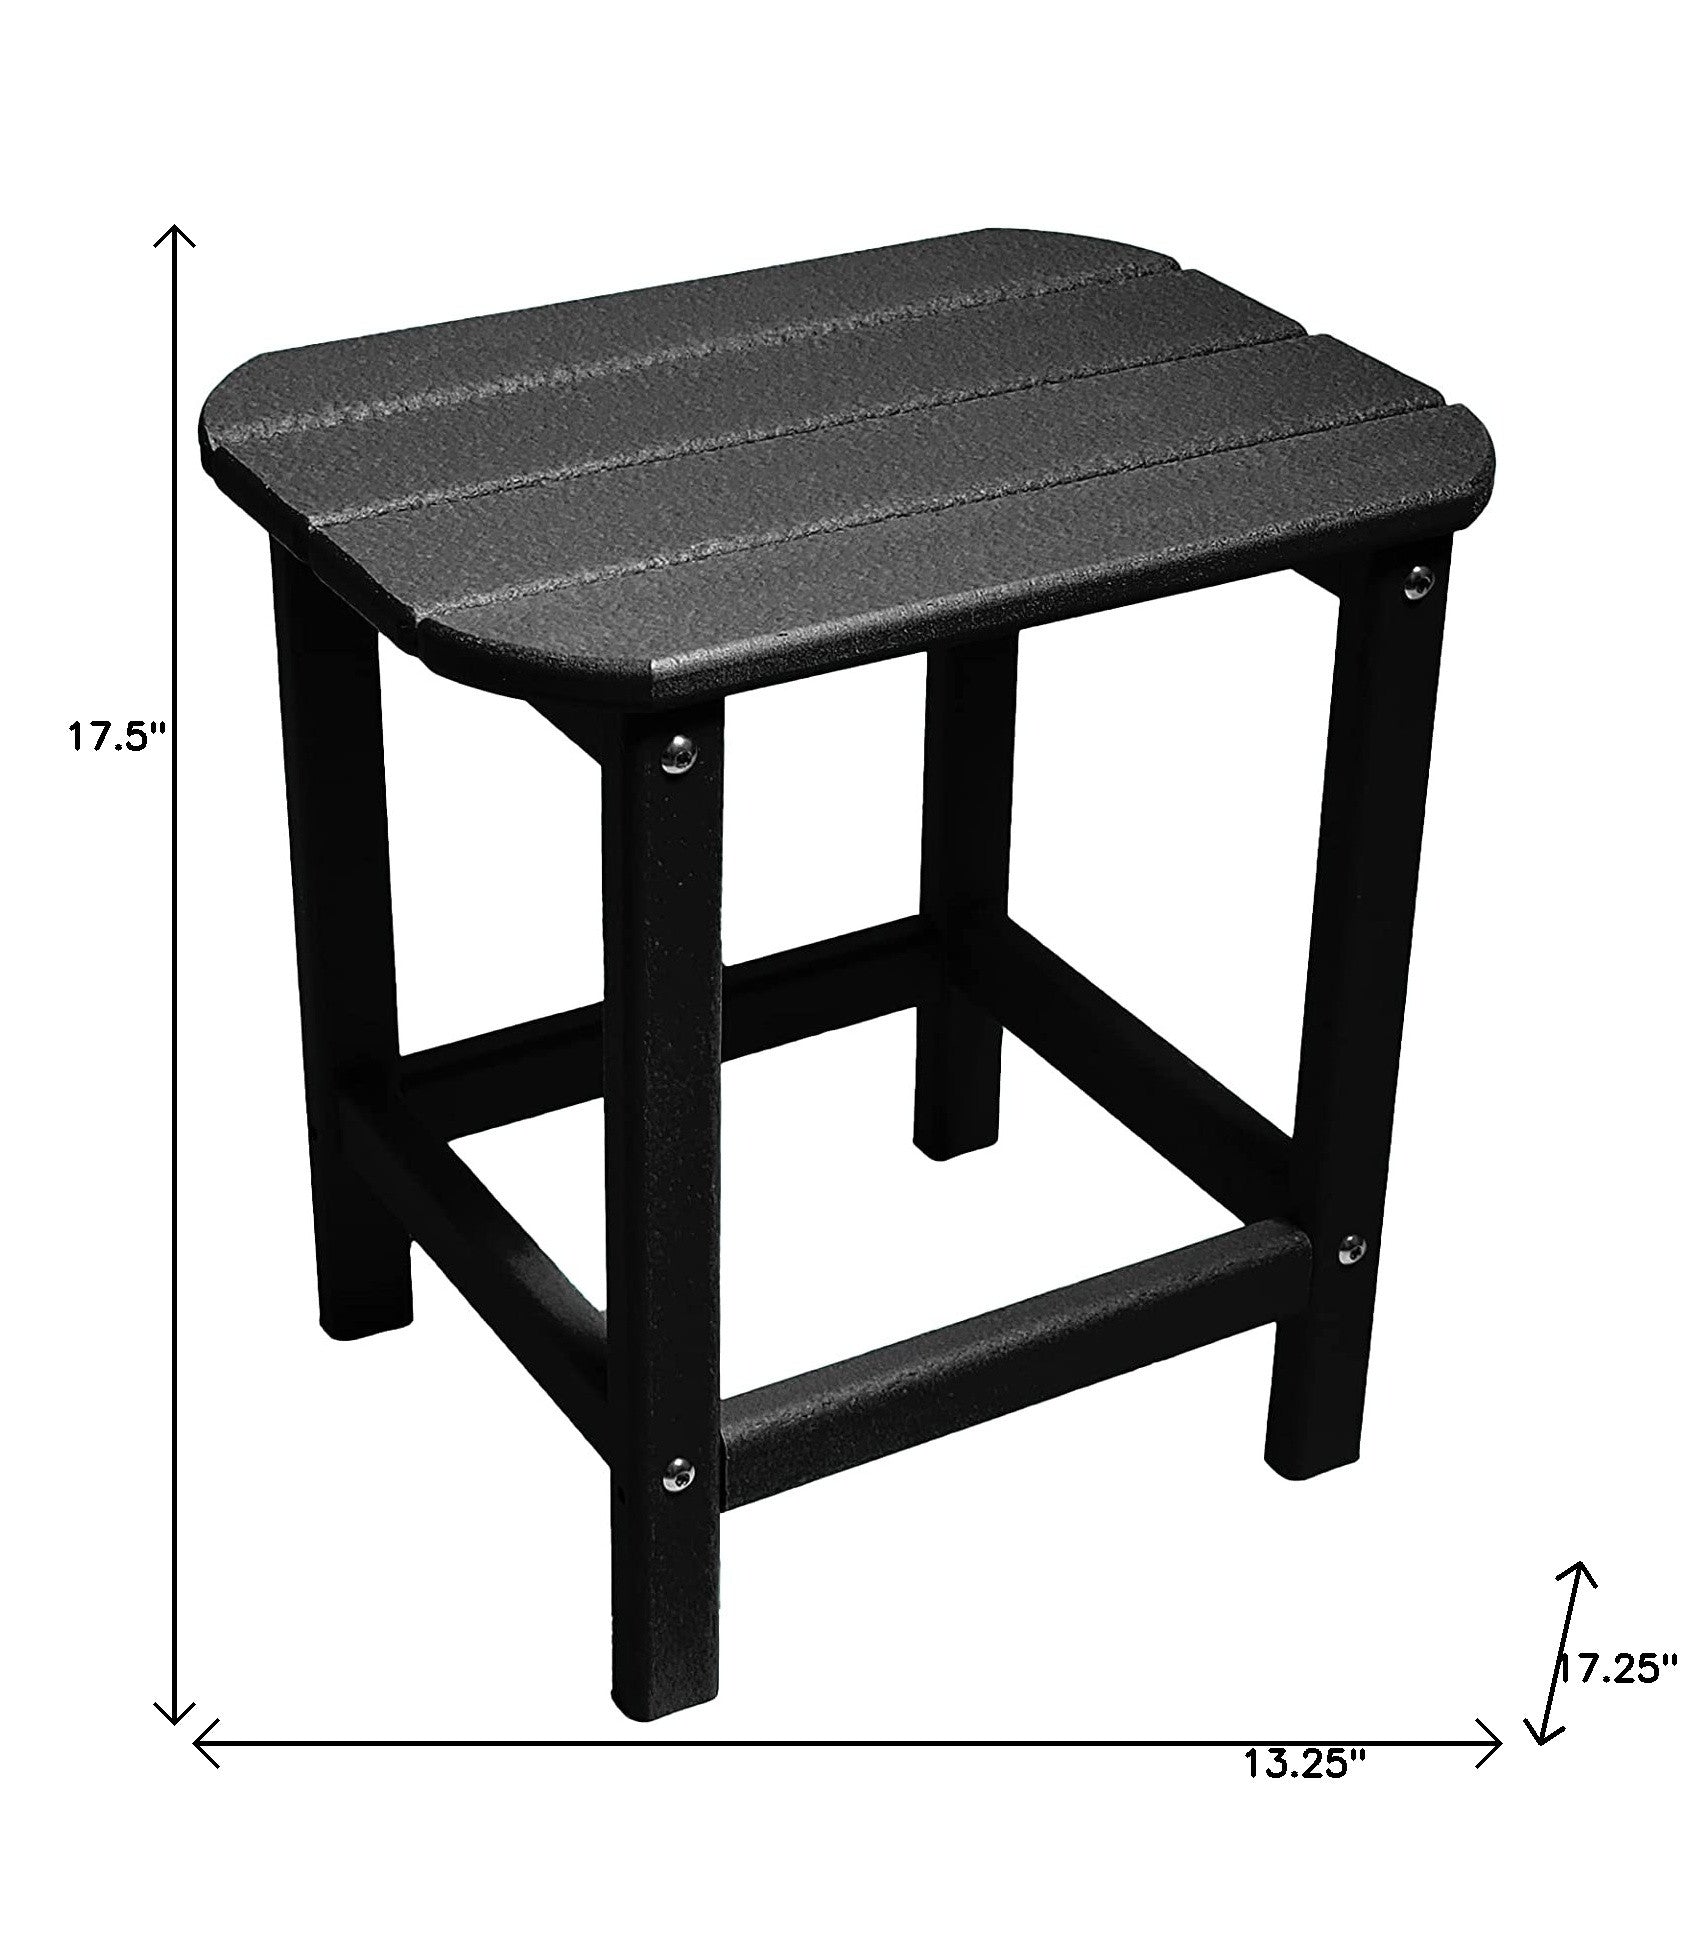 13" Black Resin Outdoor Side Table